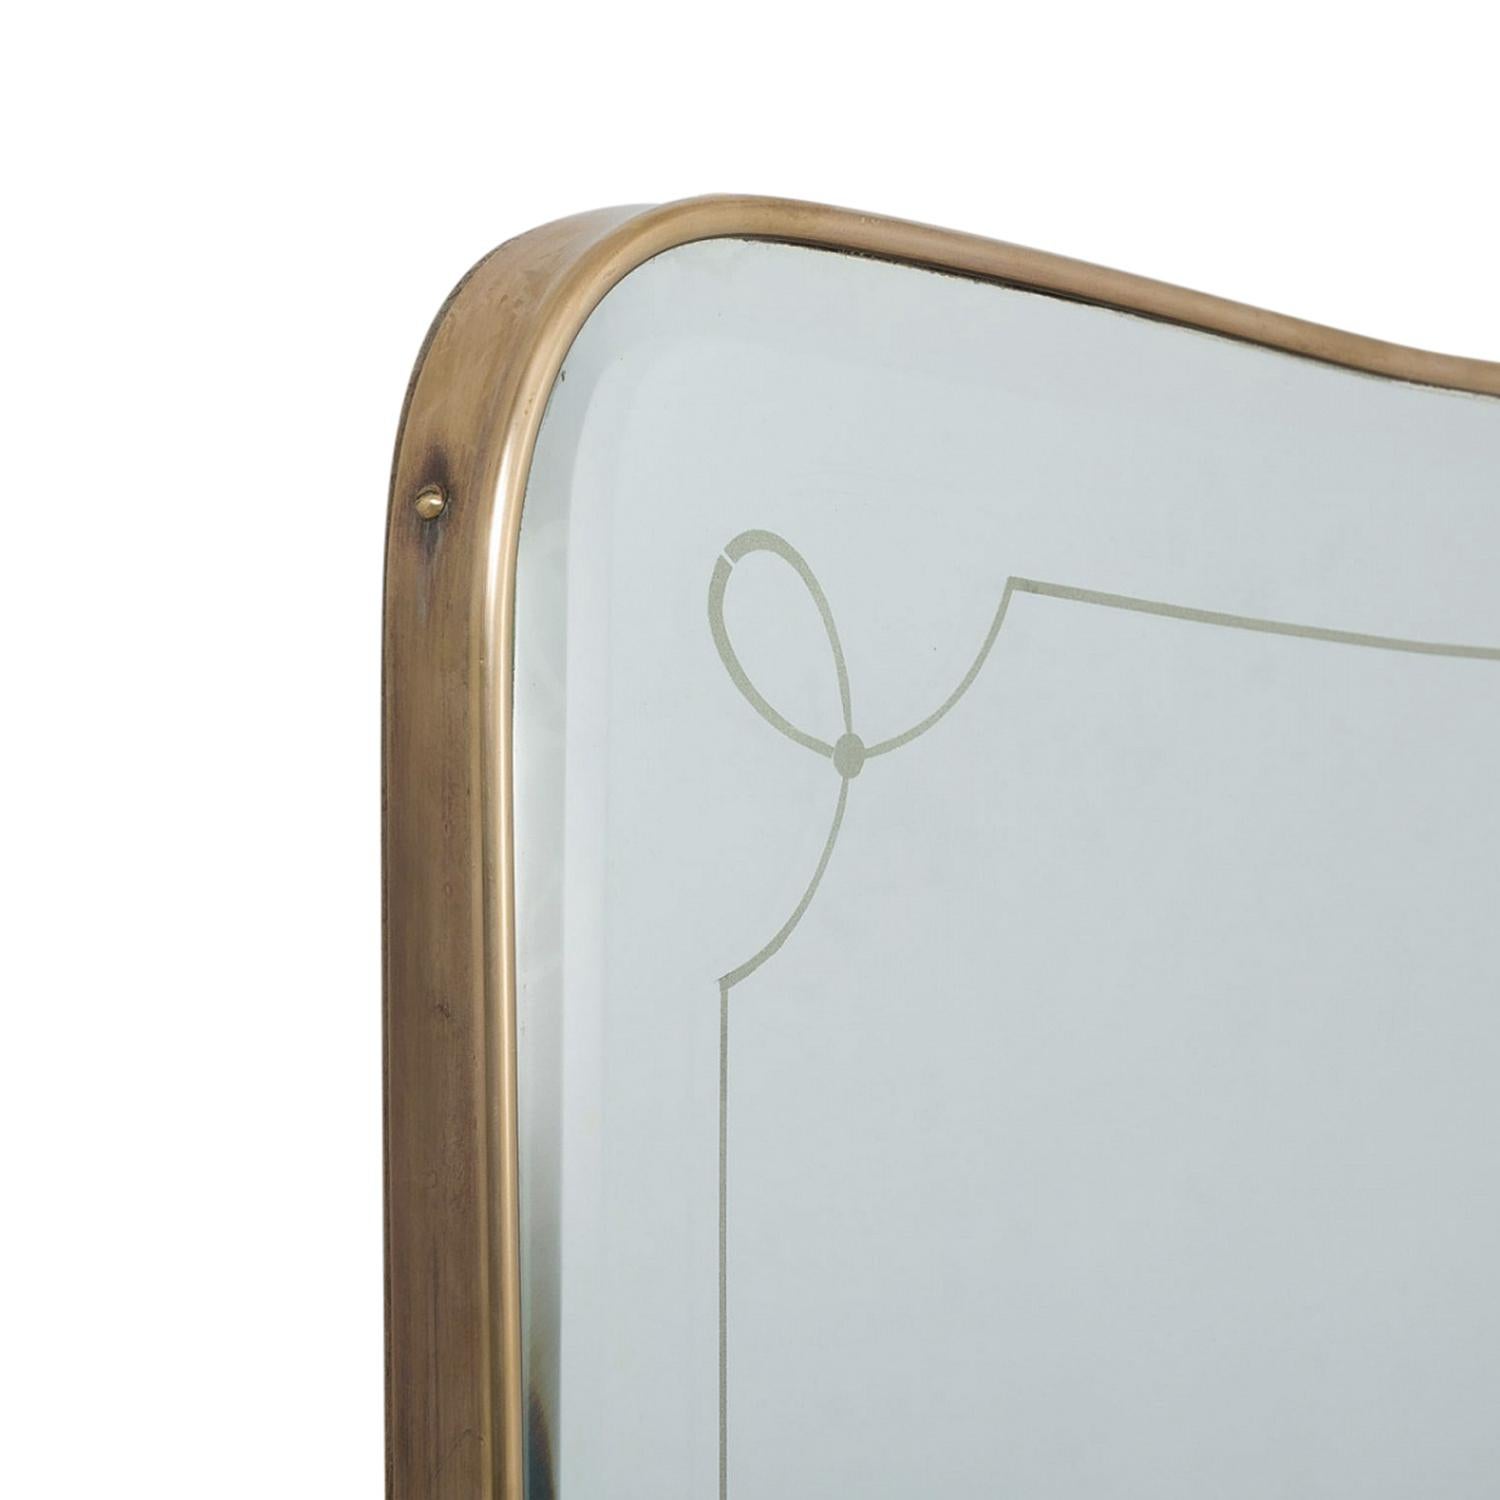 Metal 20th Century French Art Deco Asymmetrical Brass Wall Glass Mirror, Vintage Décor For Sale